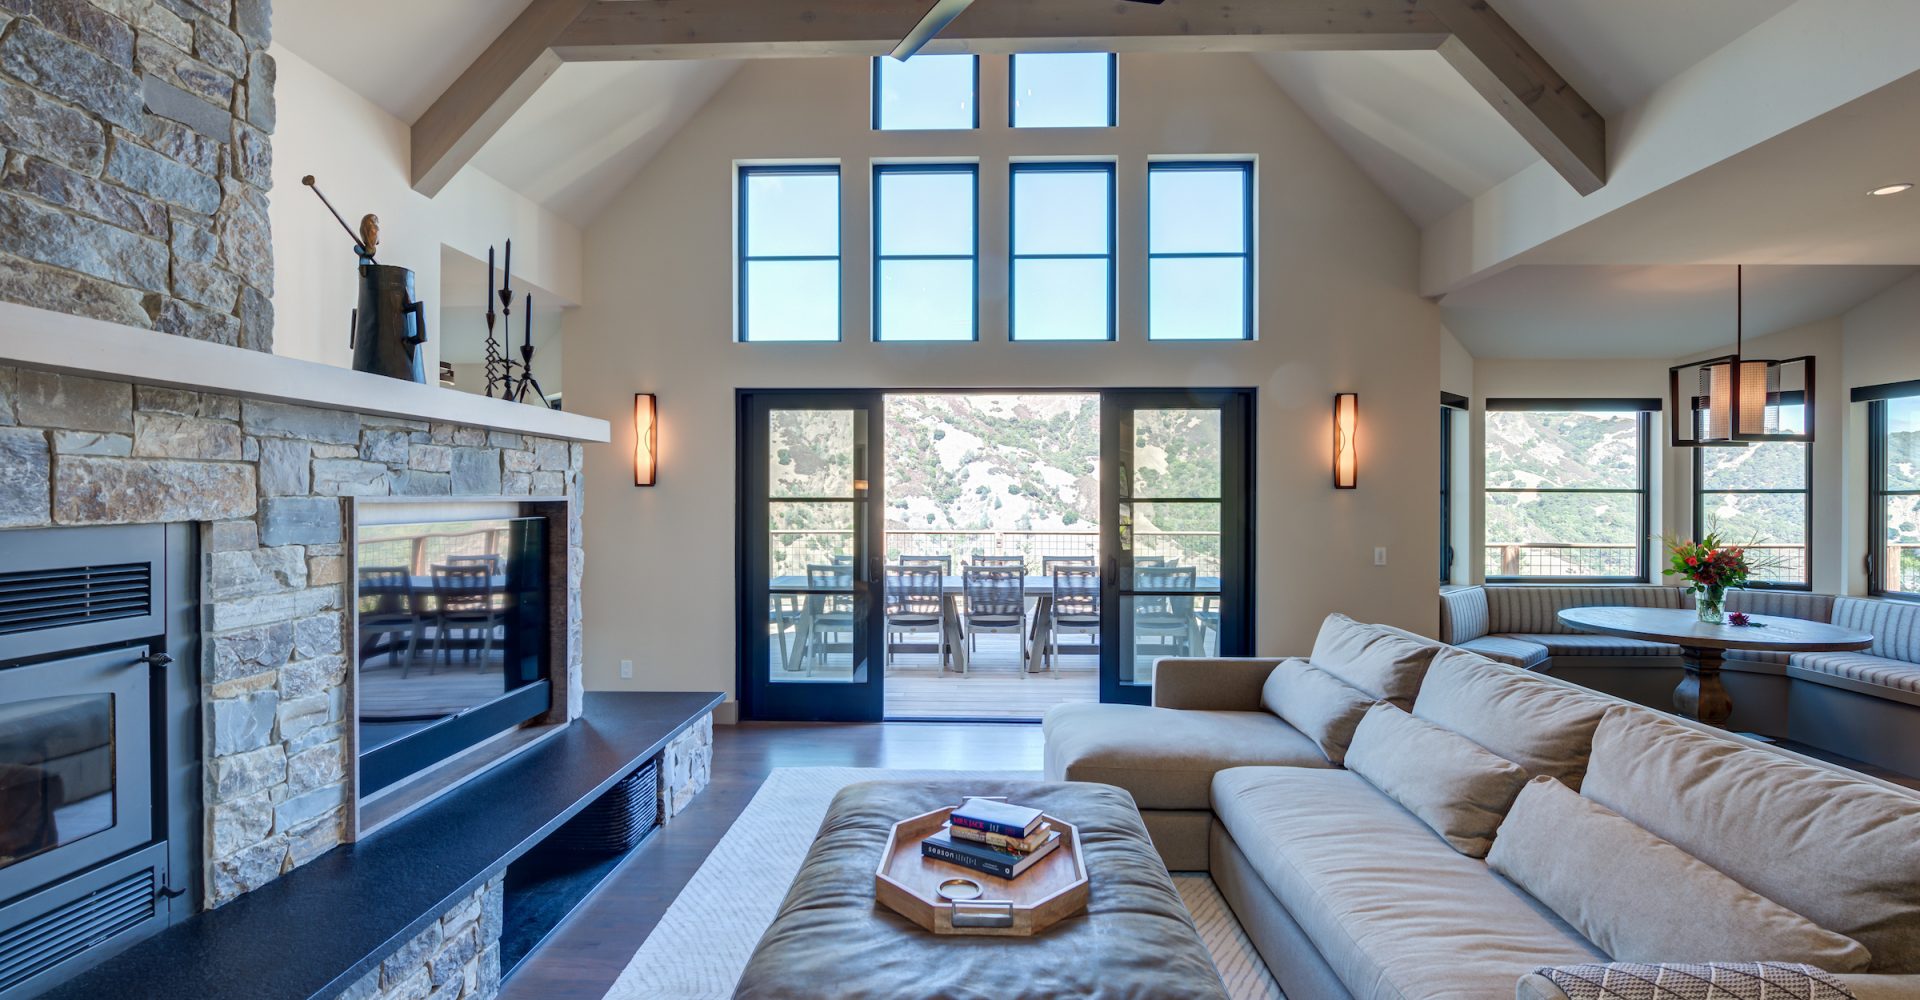 Custom living room remodel with skylights and fireplace by Sonoma County home builder LEFF Design Build.